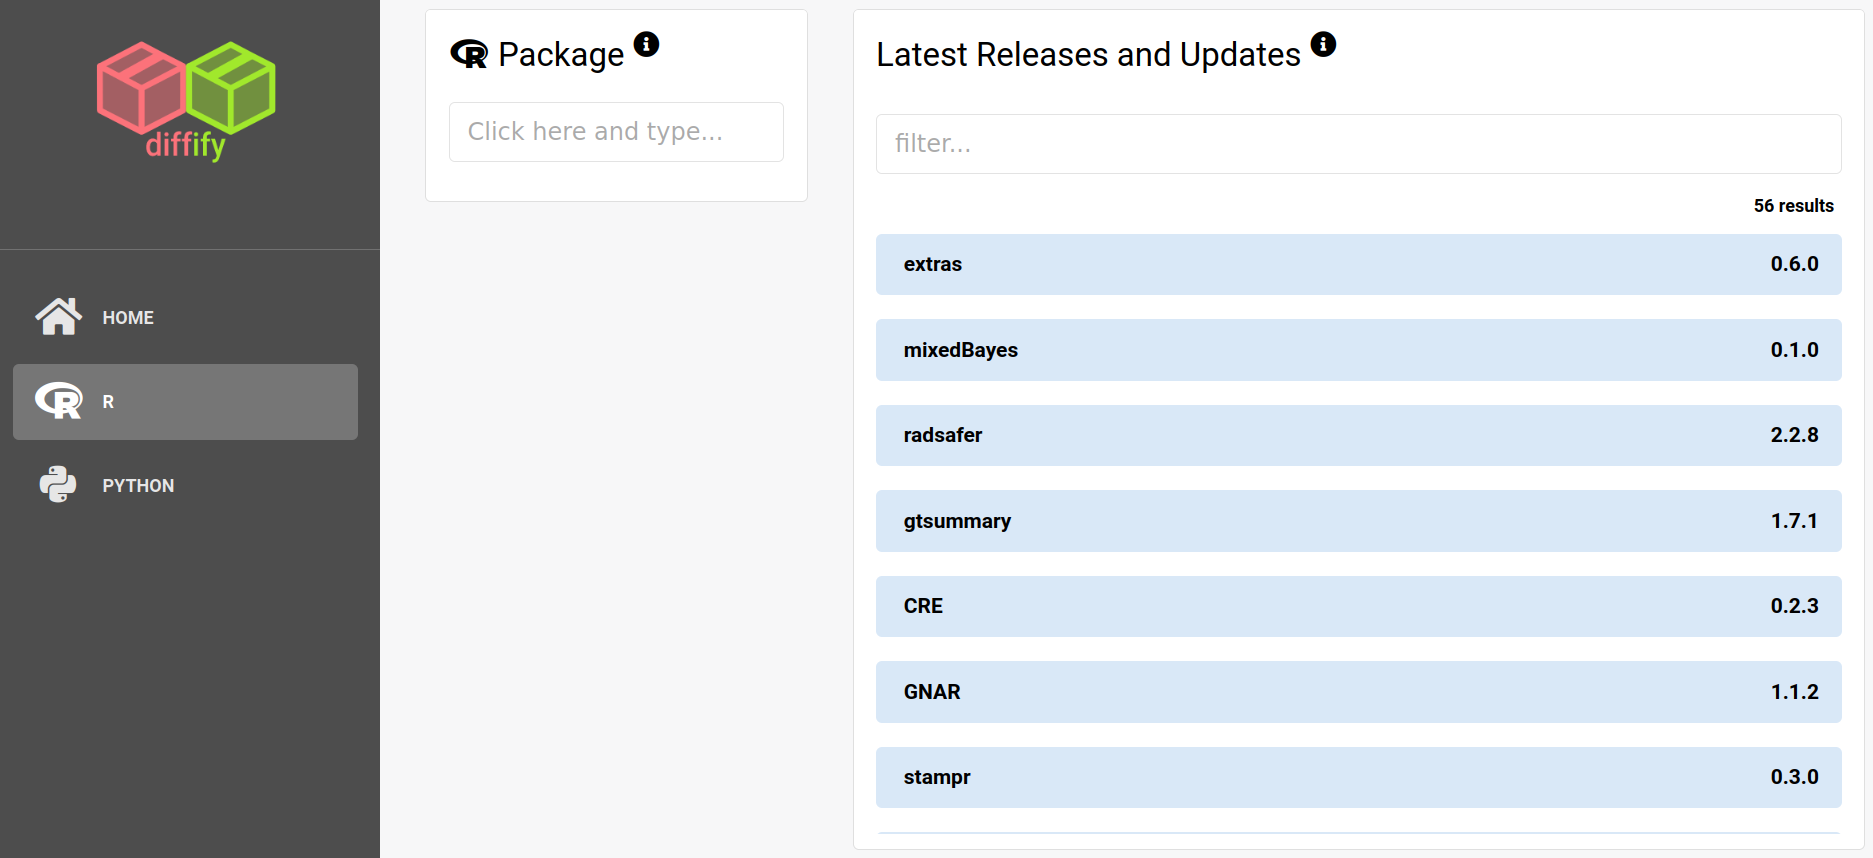 A screenshot of the R packages homepage: As before, there is a dropdown to the left for selecting an R package. There is also a new window to the right titled “Latest Releases and Updates”, which shows a list of new and updated packages that have been published in the past day or so.